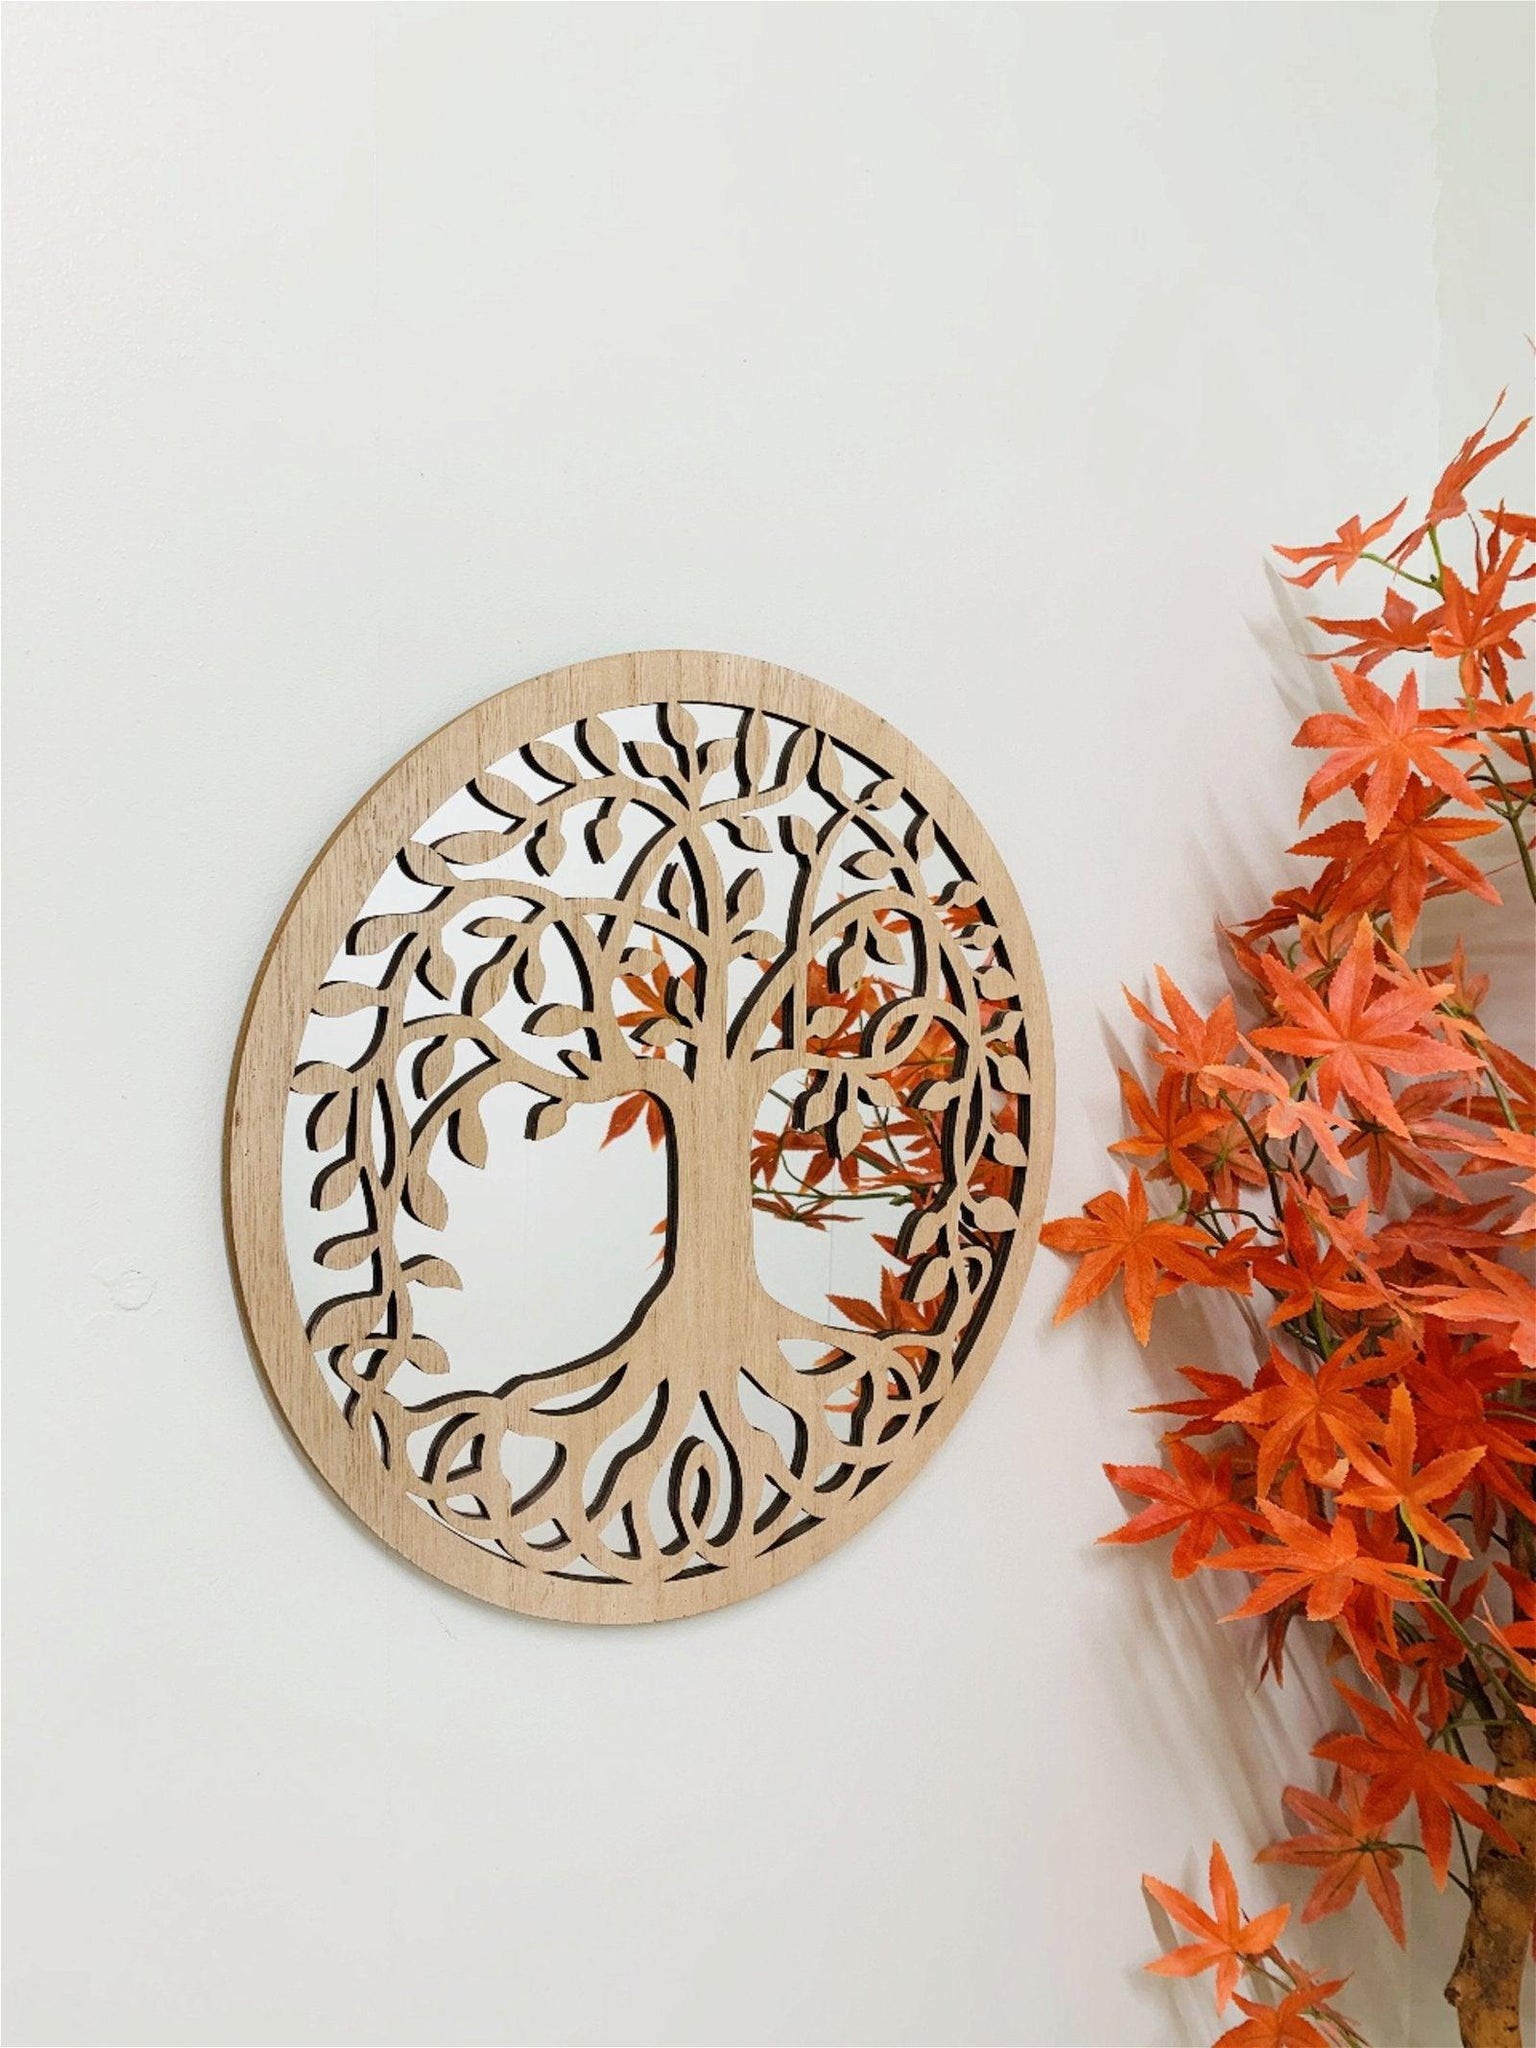 Round Cut Out Tree Of Life Mirror 35cm - £27.99 - 